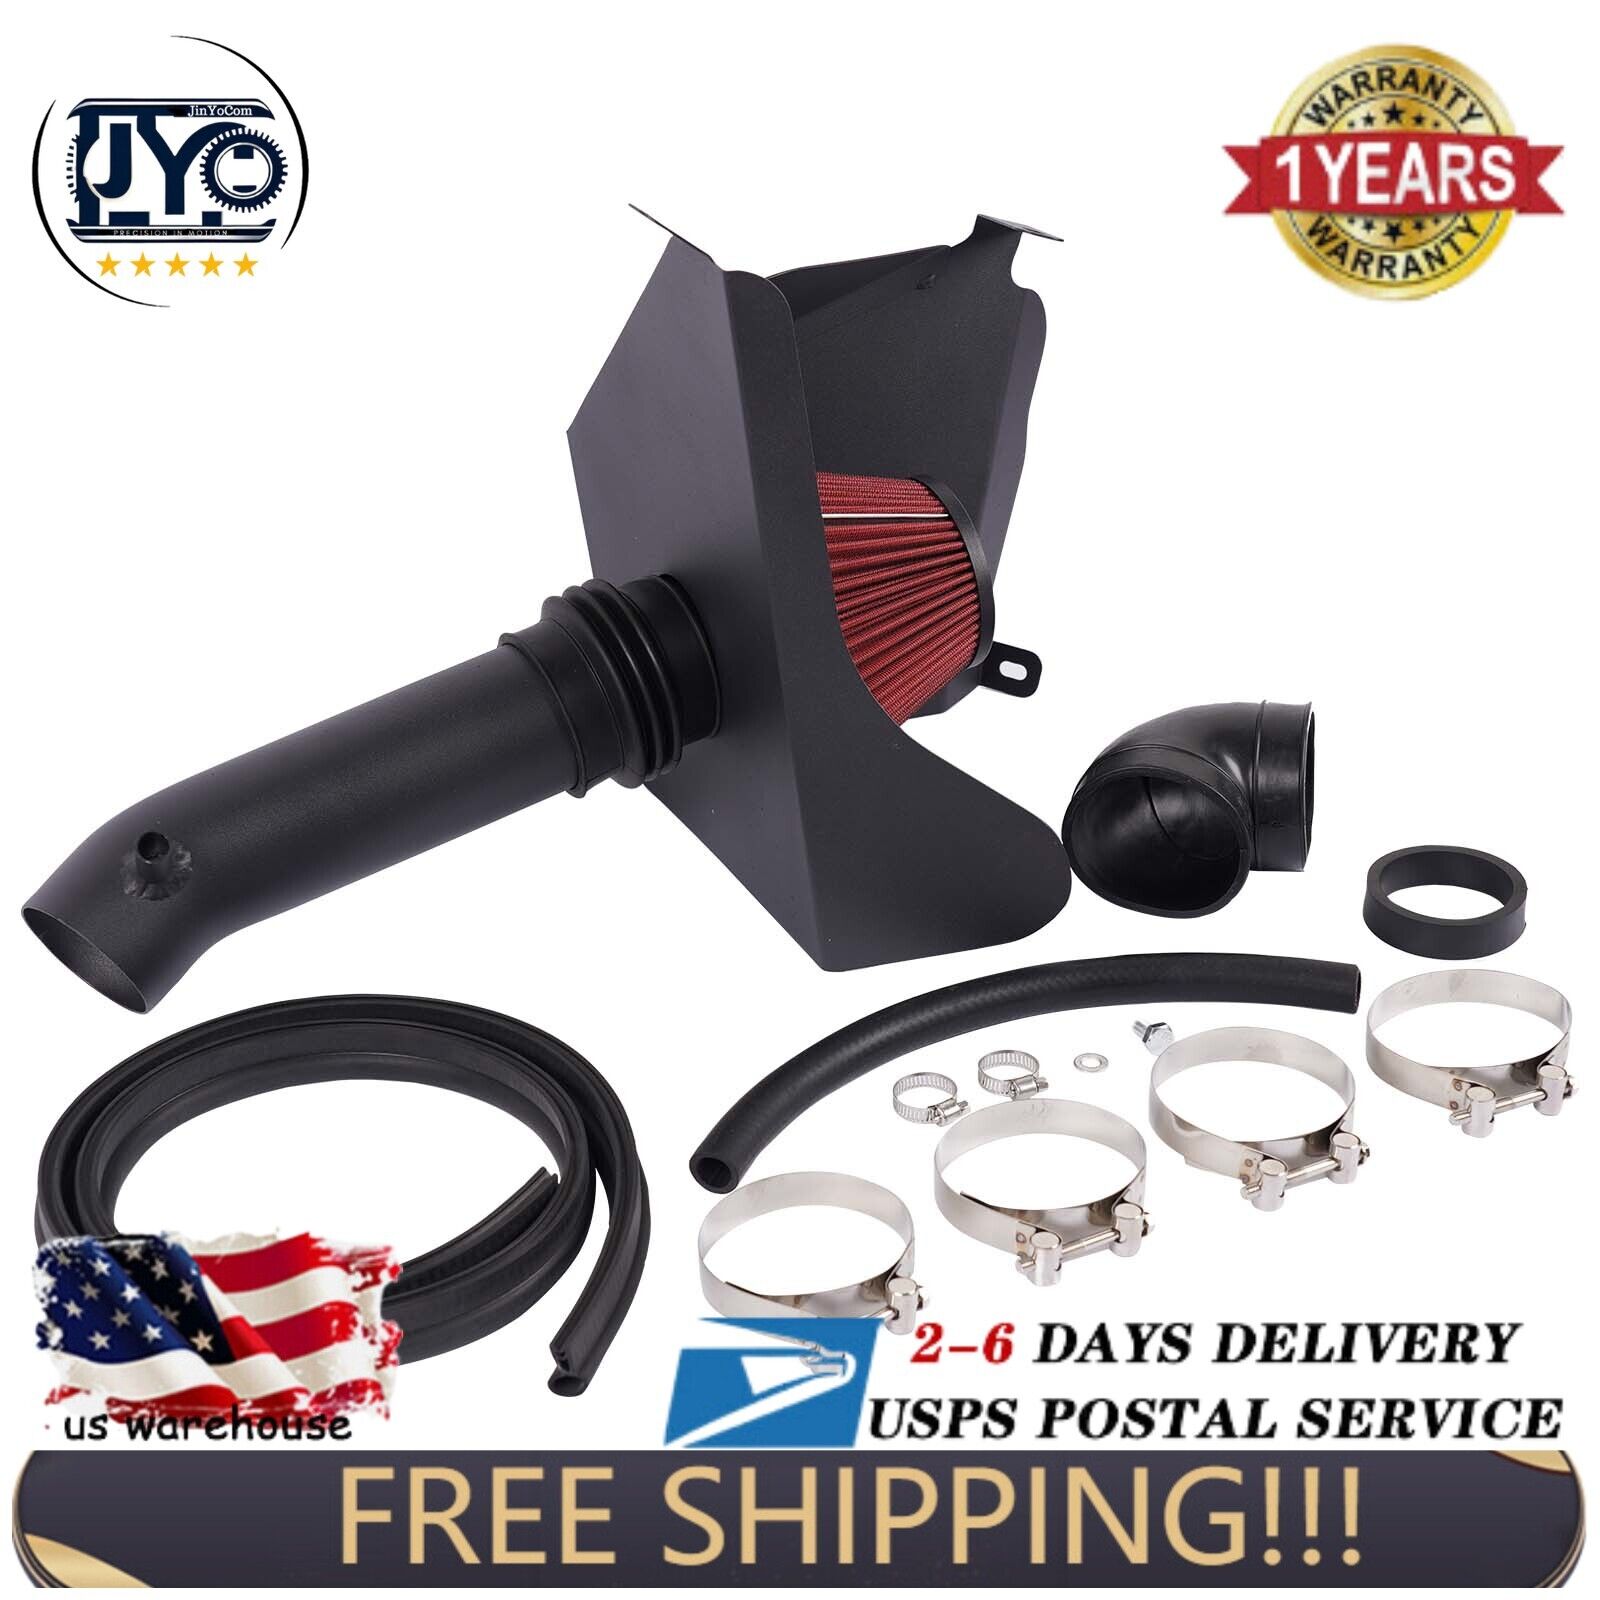 Cold Air Intake Set for 1991-2001 Jeep Cherokee XJ SE 4.0L l6 GAS OHV 10552